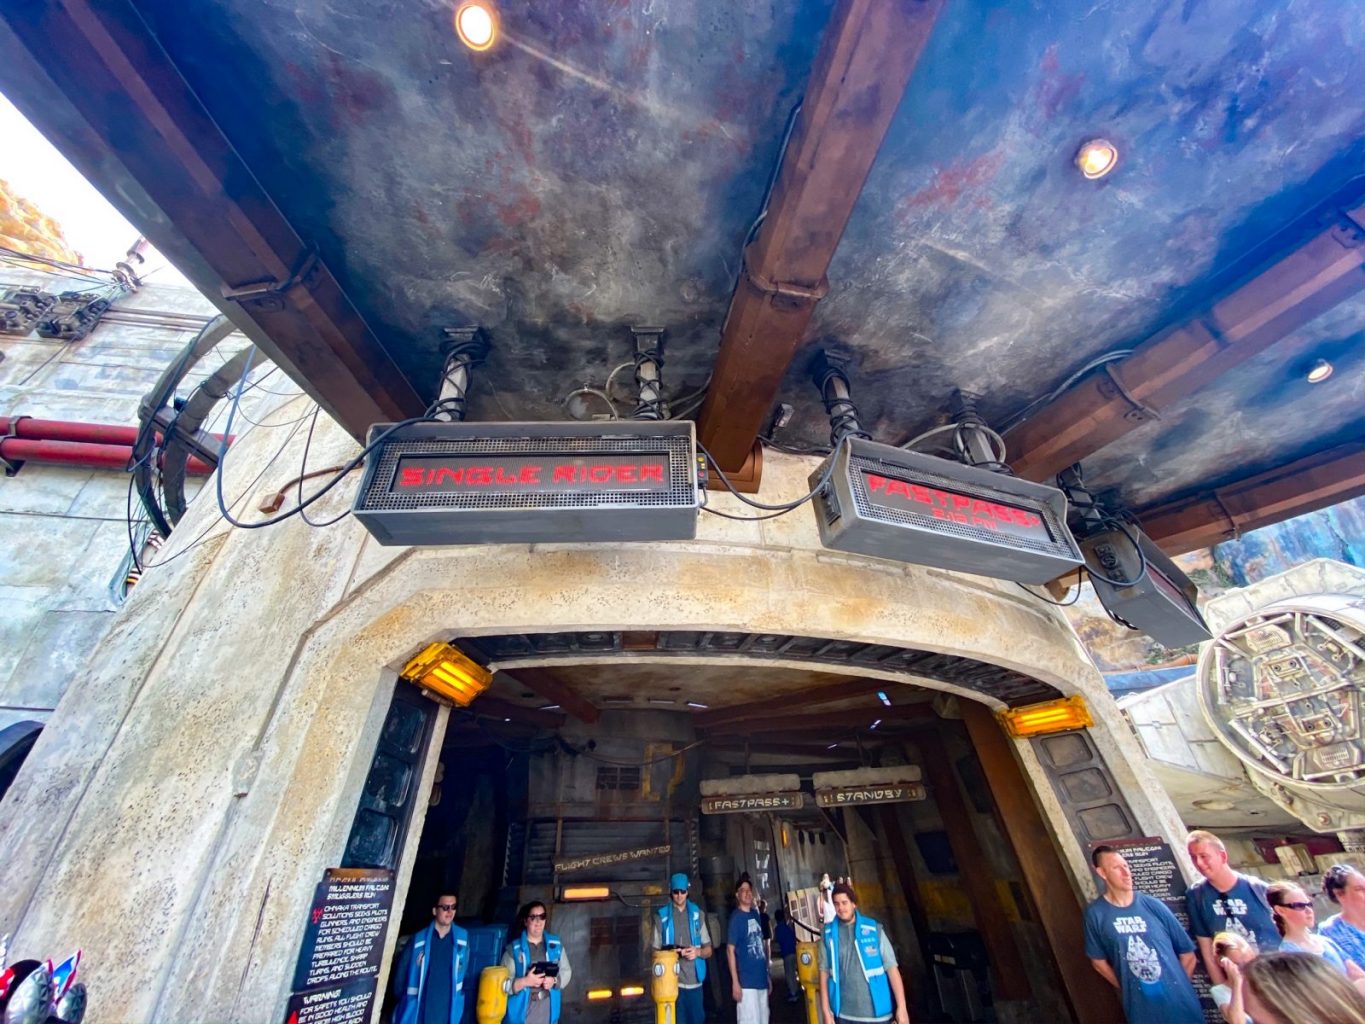 Disney single rider lines next to fast pass line sign at Millennium Falcon entrance